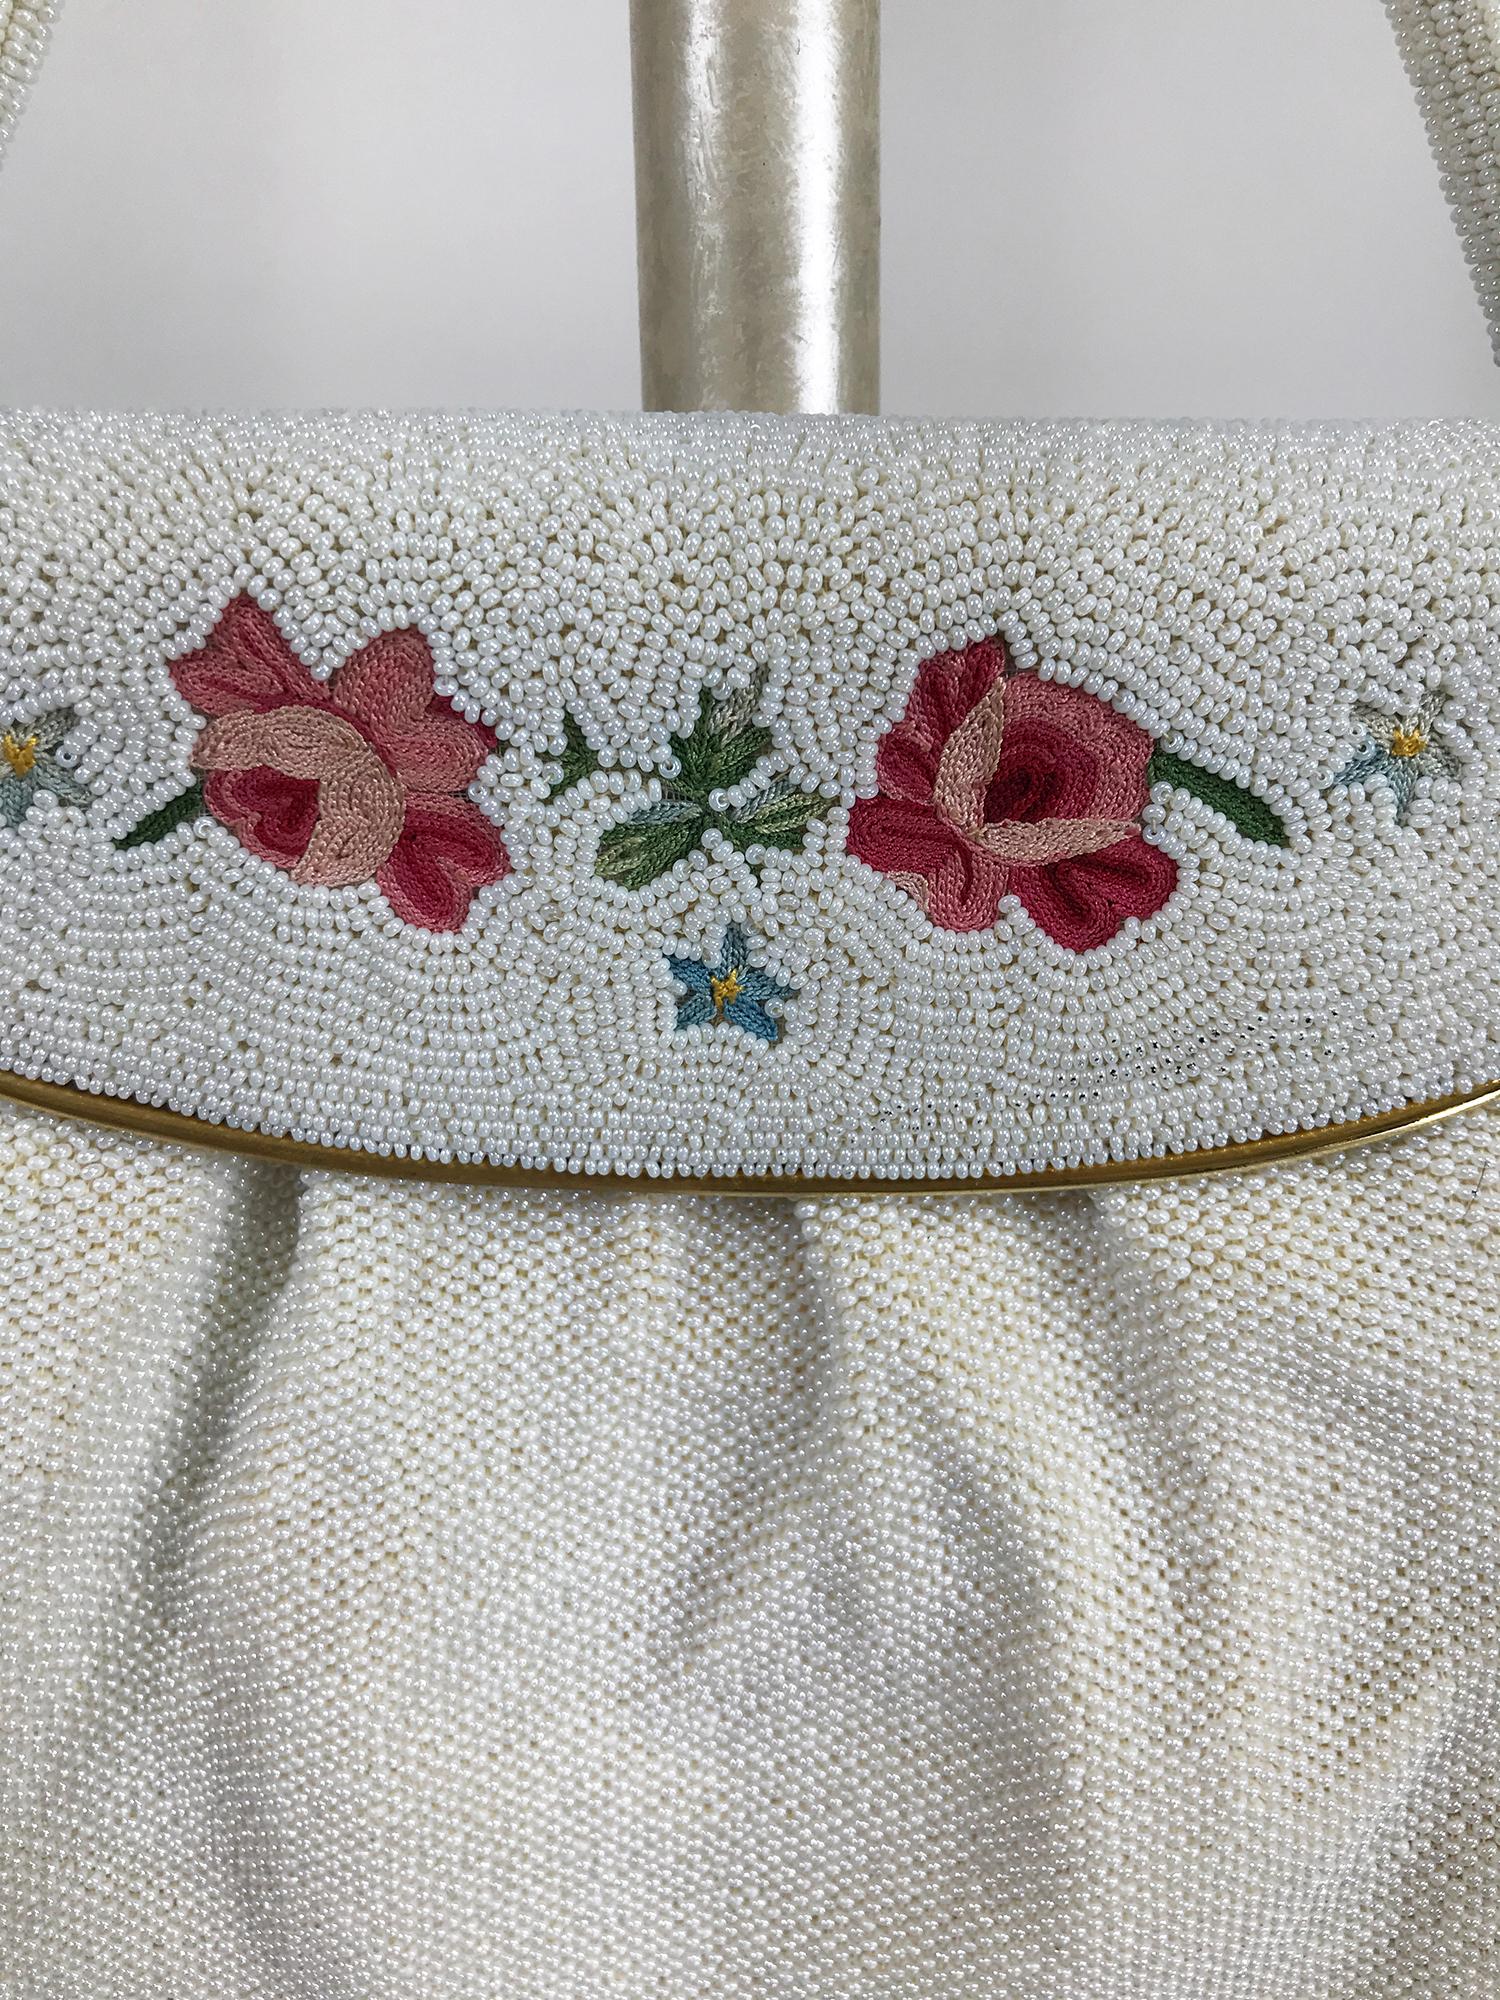 Vintage Josef pearl with embroidery evening bag with gold metal frame from the 1950s. This beautiful bag is hand beaded with tiny pearls, the flap closure has a gold metal frame and clasp that is embroidered with pastel flowers and set with tiny